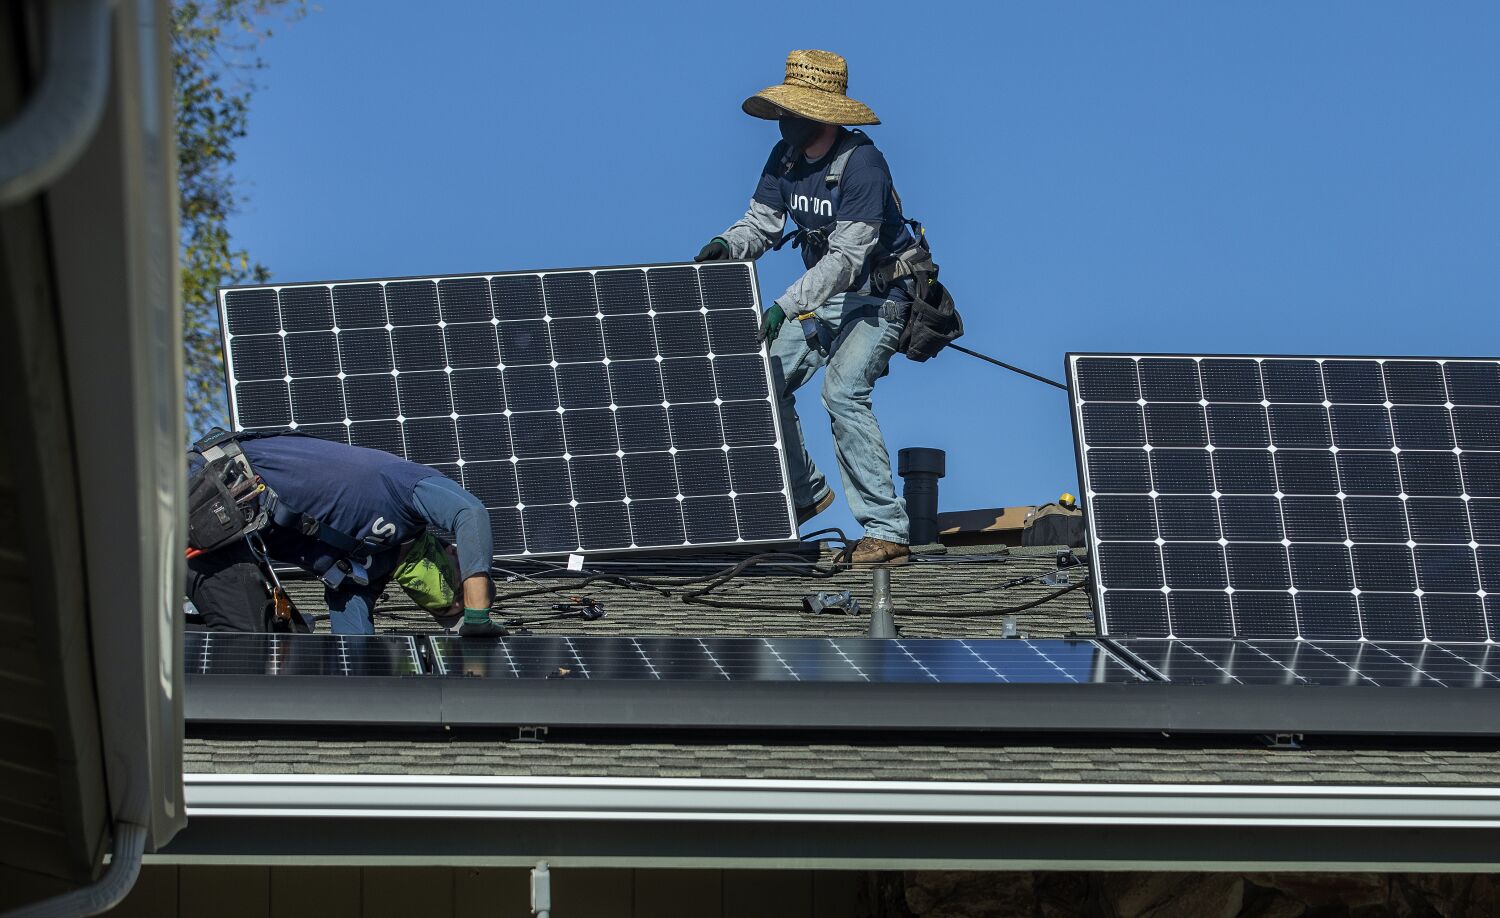 California just slashed rooftop solar incentives. What happens next?